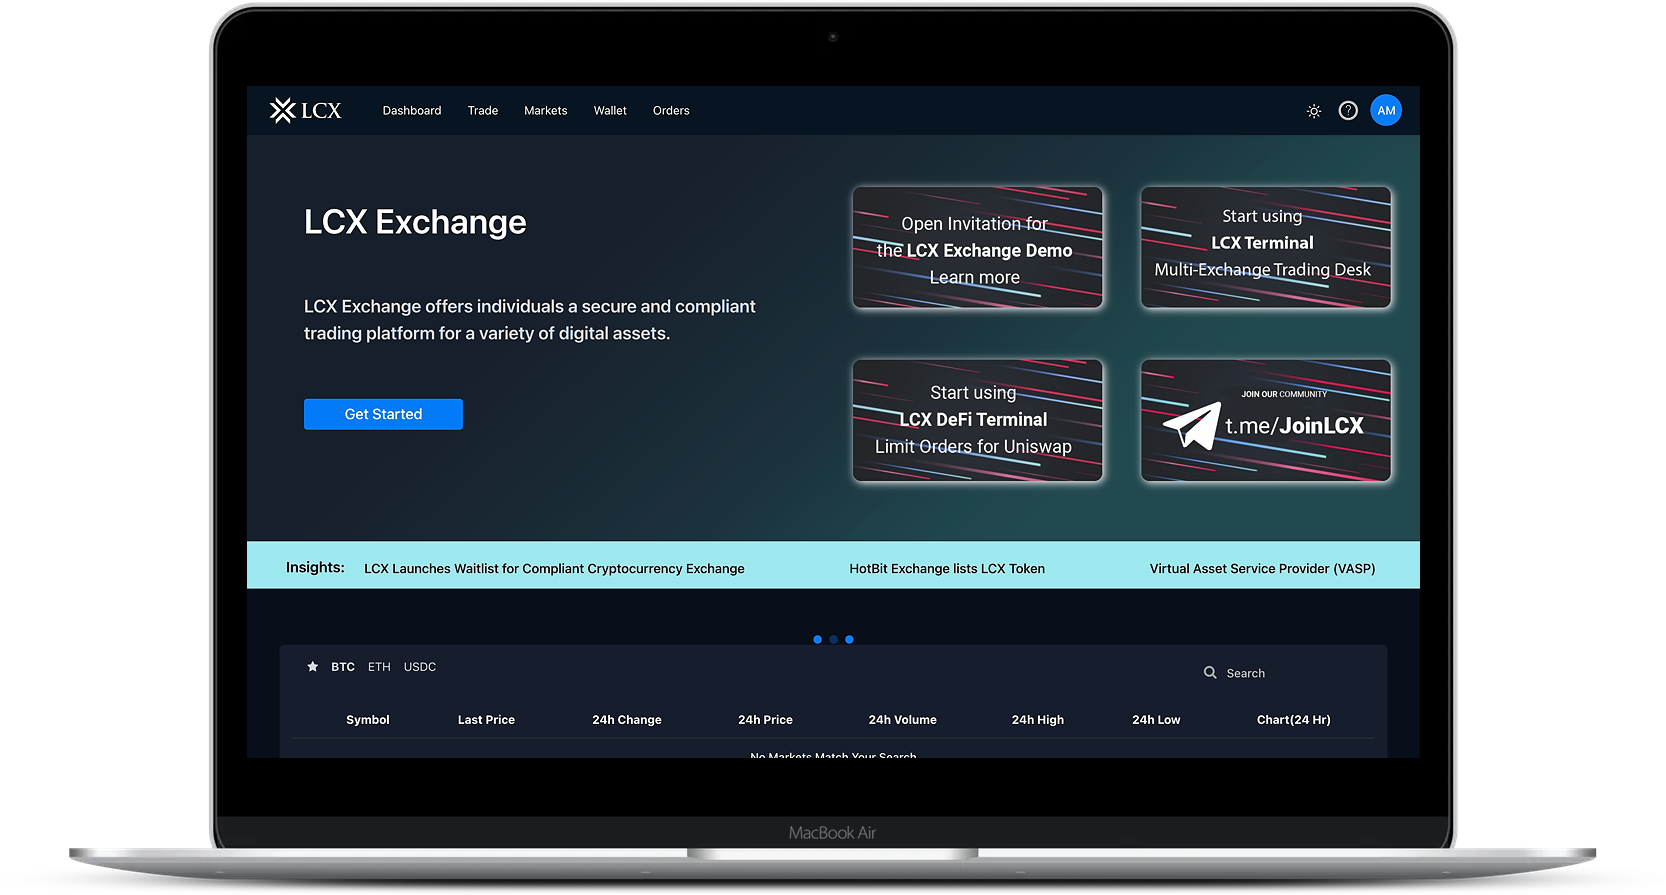 Announcing the LCX Exchange Demo Launch - LCX